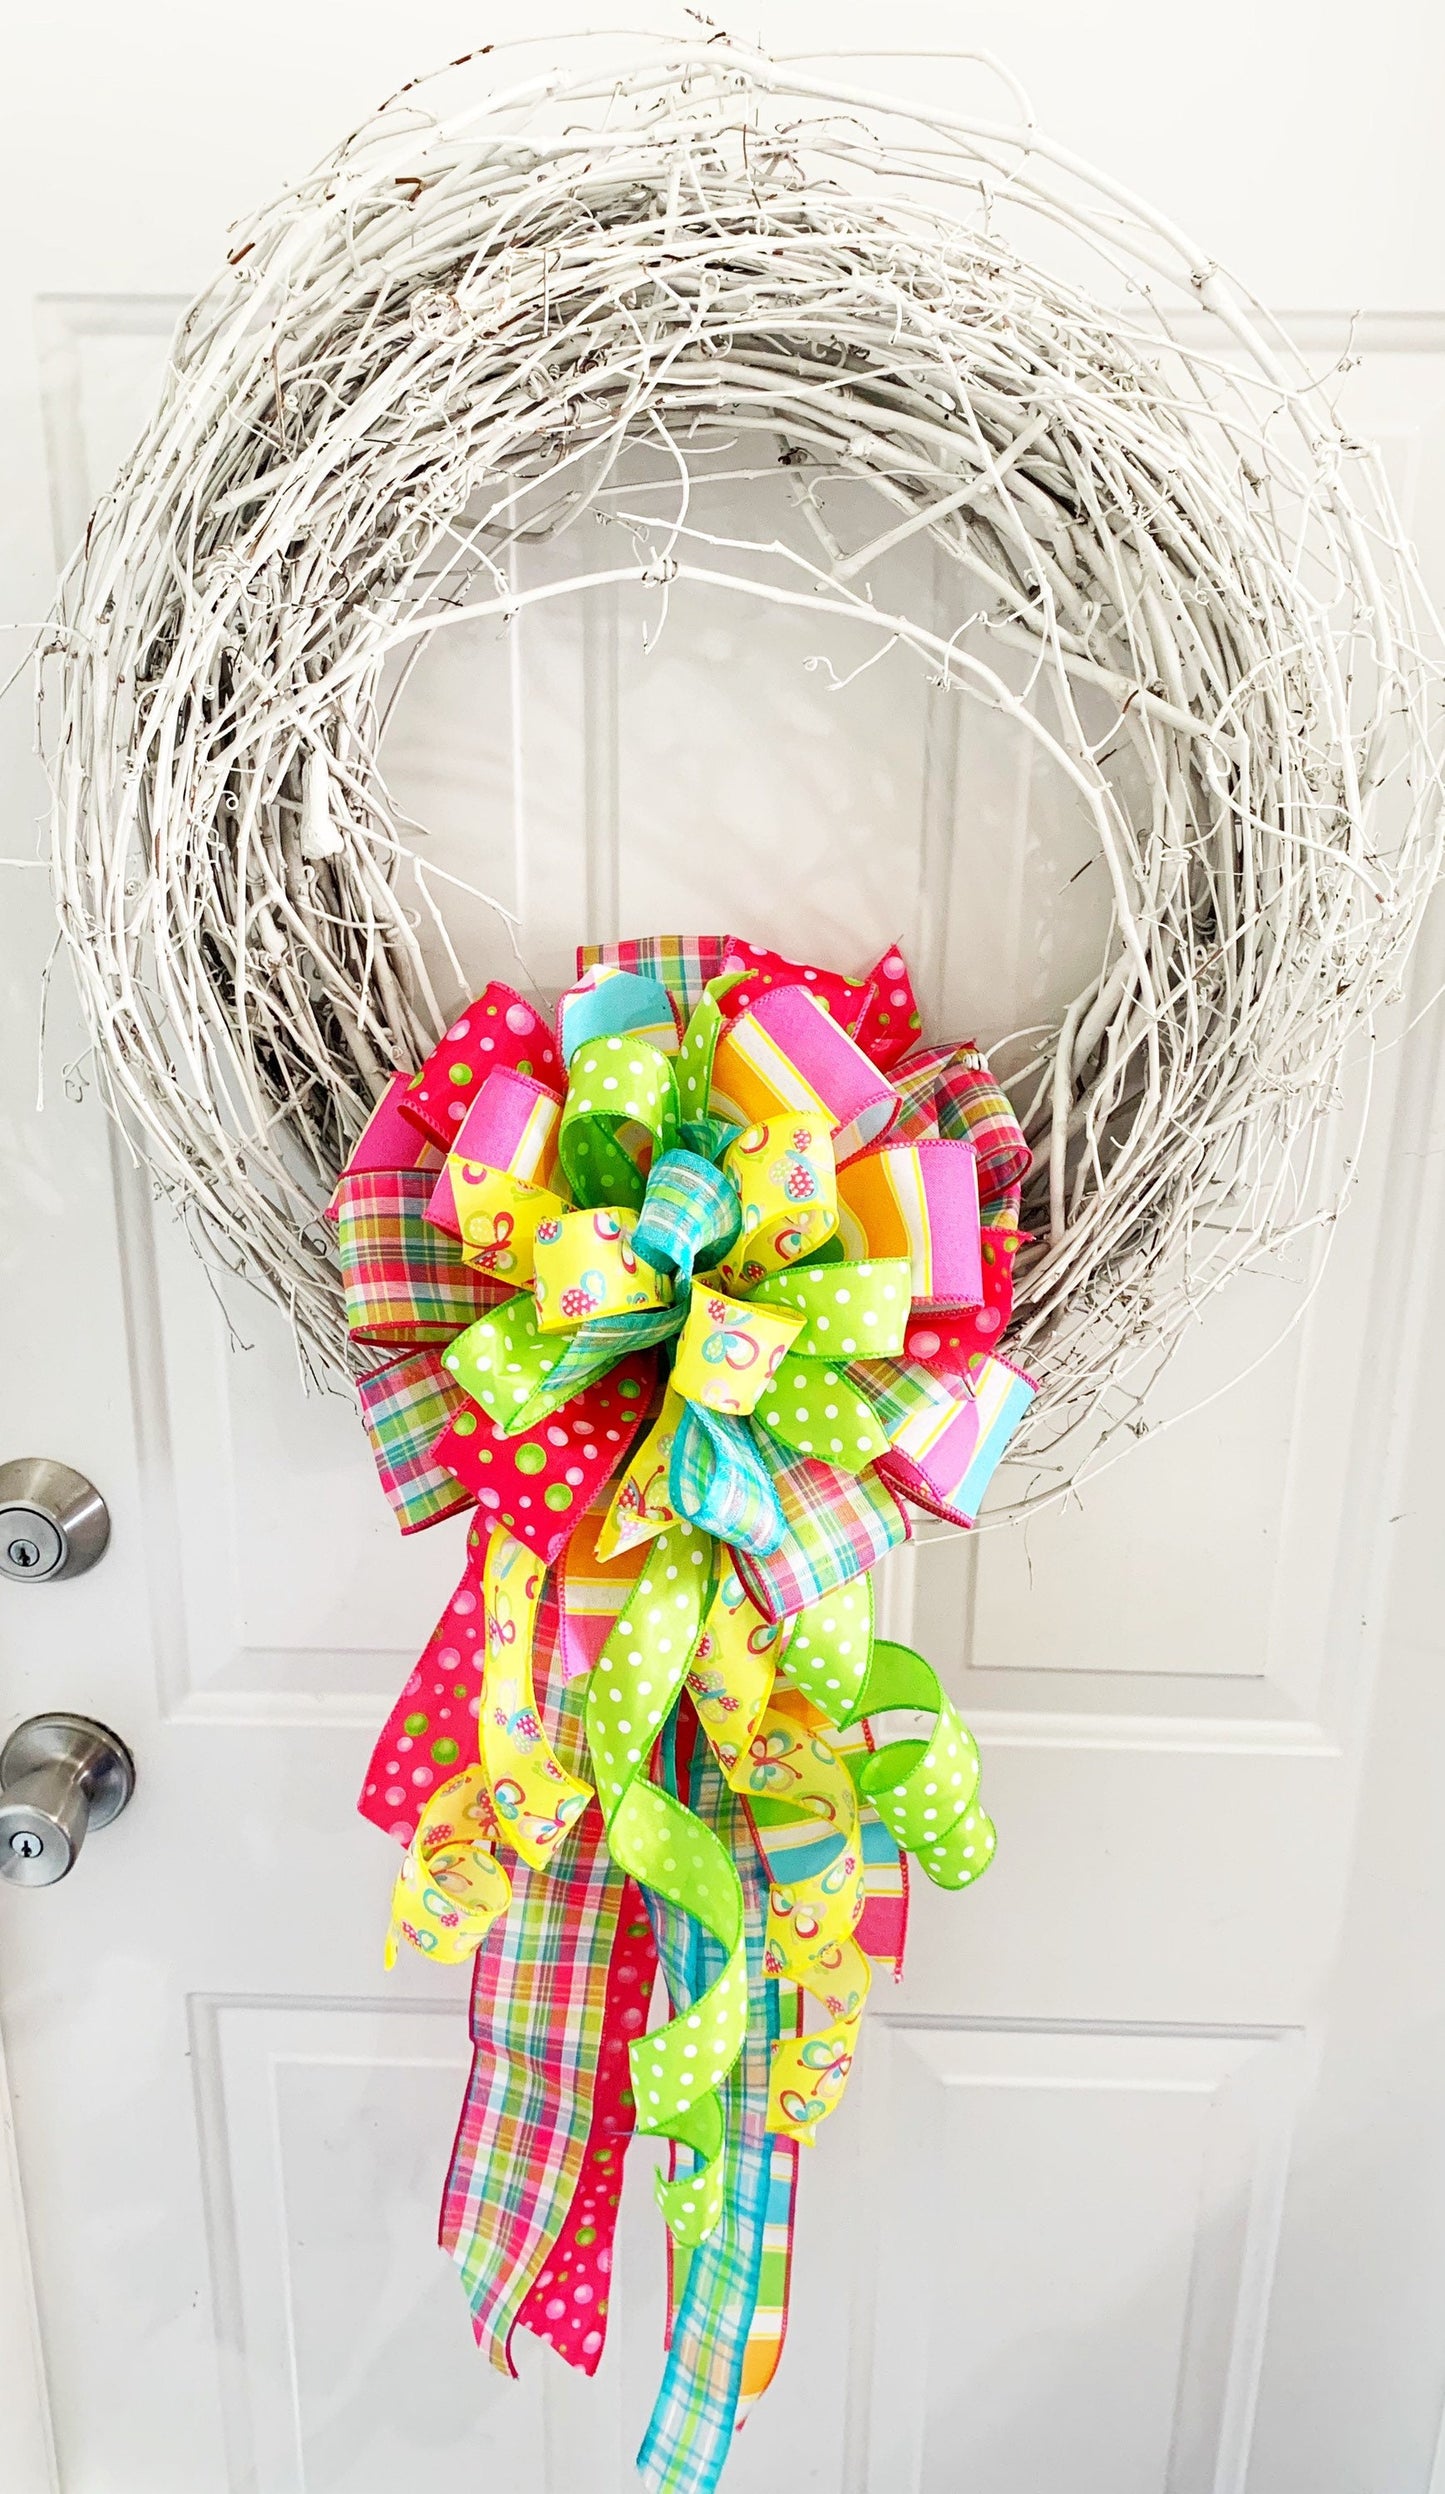 Summer Collection - Summer Bow, Spring Bow, Bright Bow, Wreath Bow, Mailbox Bow, Bow, Bows, Butterfly, Polka Dot, Gift, Ribbon, Plaid Ribbon